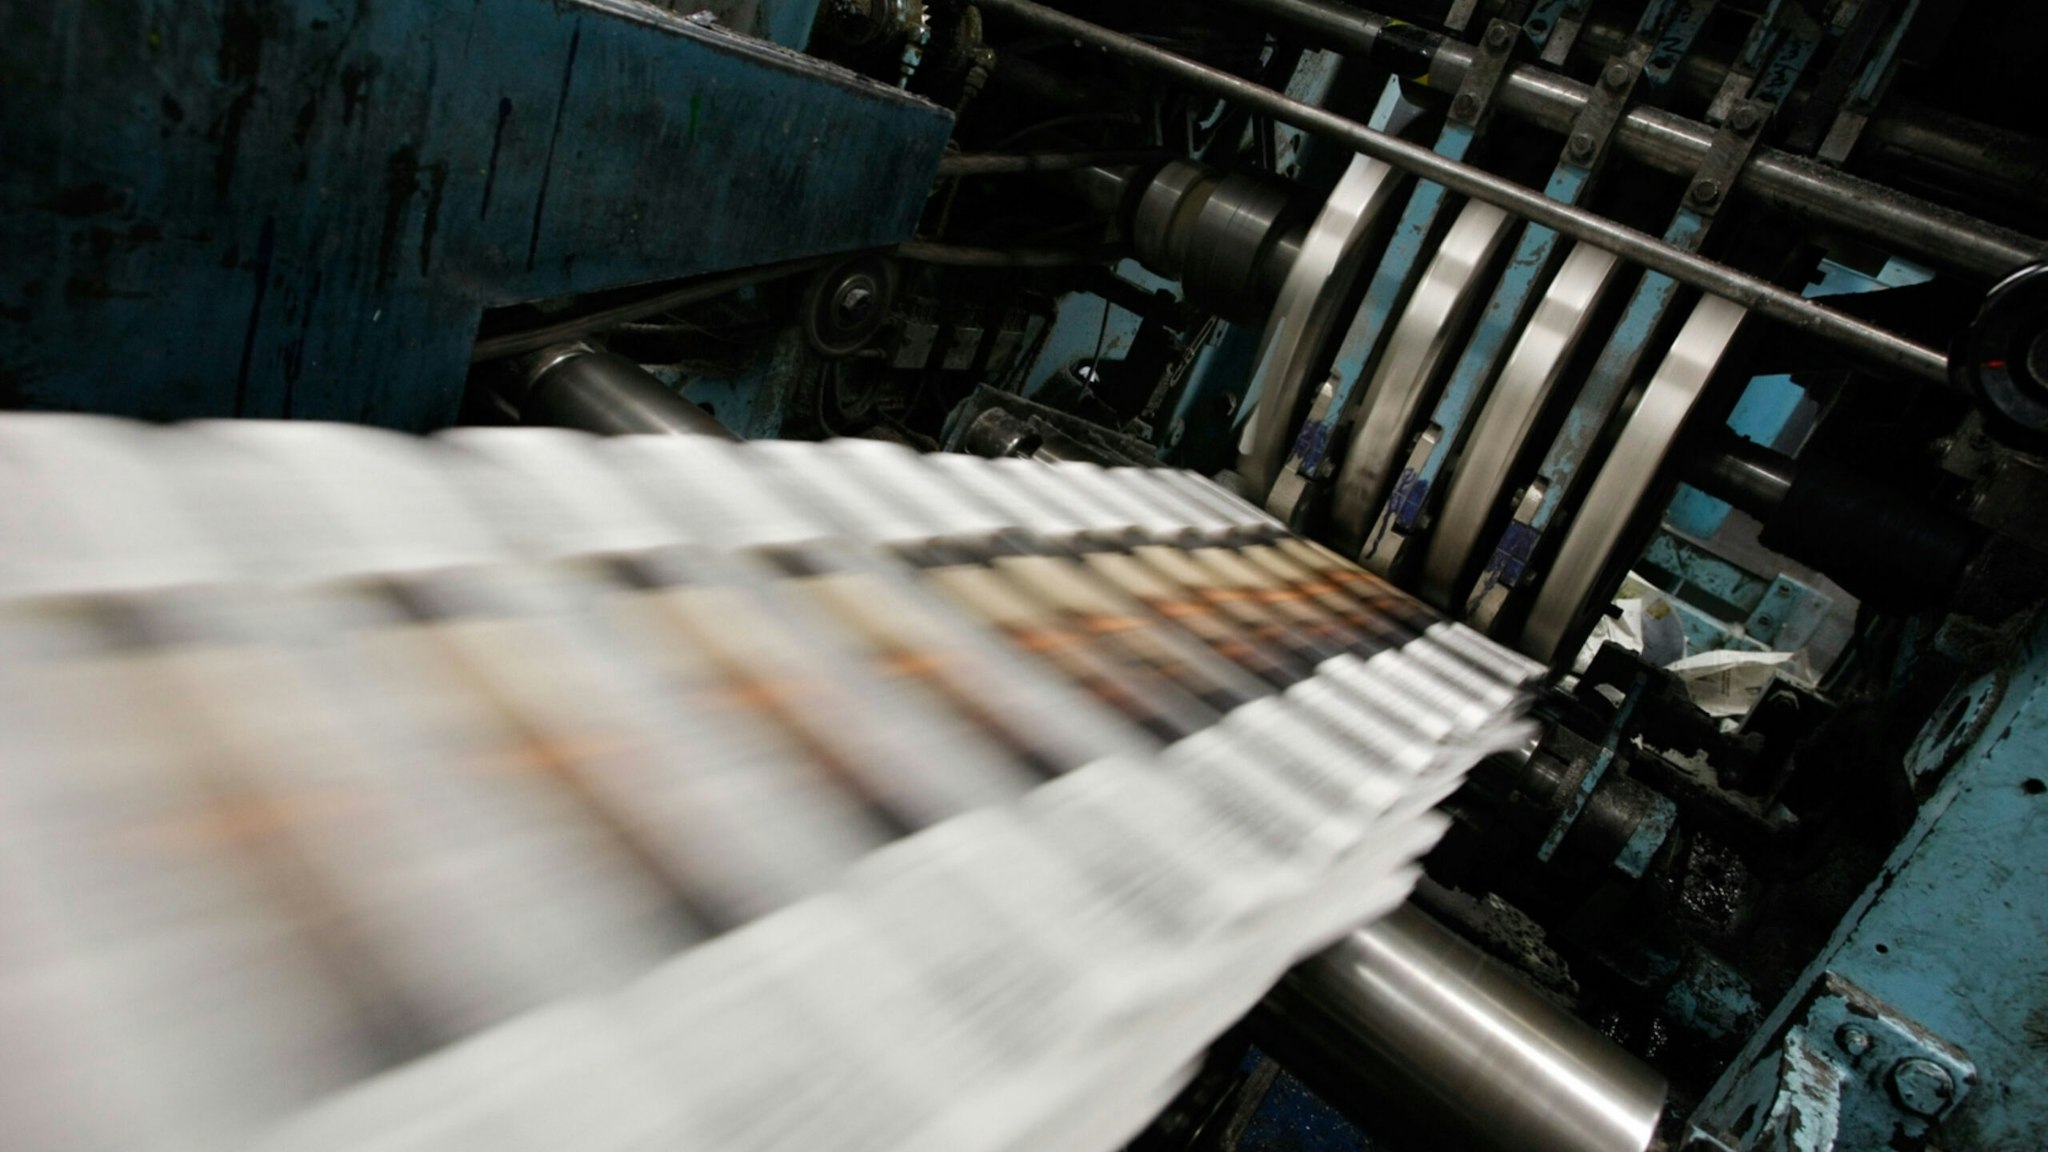 Freshly printed copies of the San Francisco Chronicle roll off the printing press at one of the Chronicle's printing facilities September 20, 2007 in San Francisco, California.